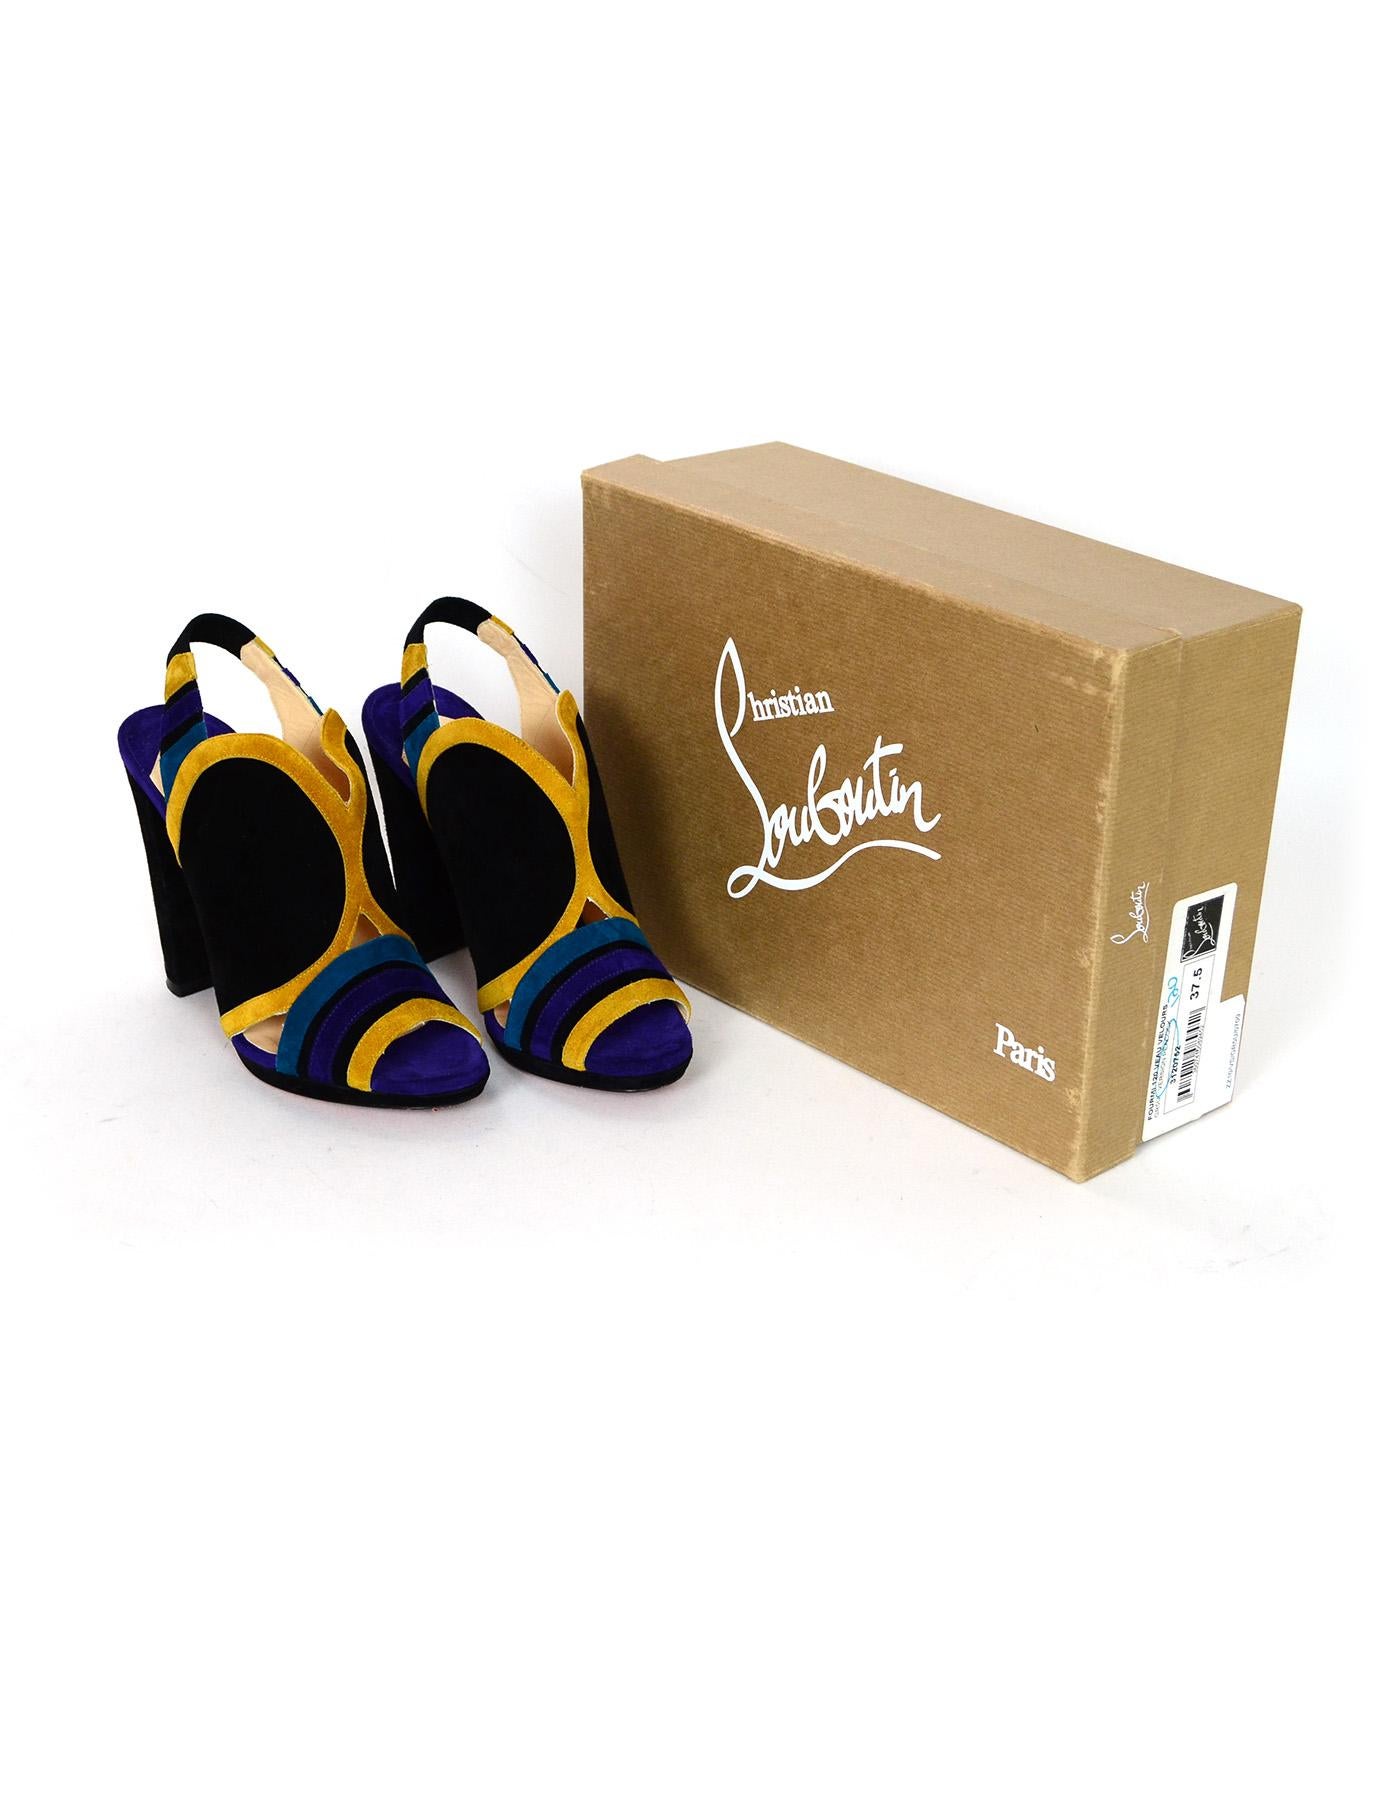 Christian Louboutin Peacock Multi Color Black, Blue, Purple, Gold Suede Fourmi 120 Open Toe Pumps Sz 37.5

Made In: Italy
Color: Multi-color black, blue, purple, gold
Materials: Suede
Closure/Opening: Slide on
Overall Condition: Excellent pre-owned